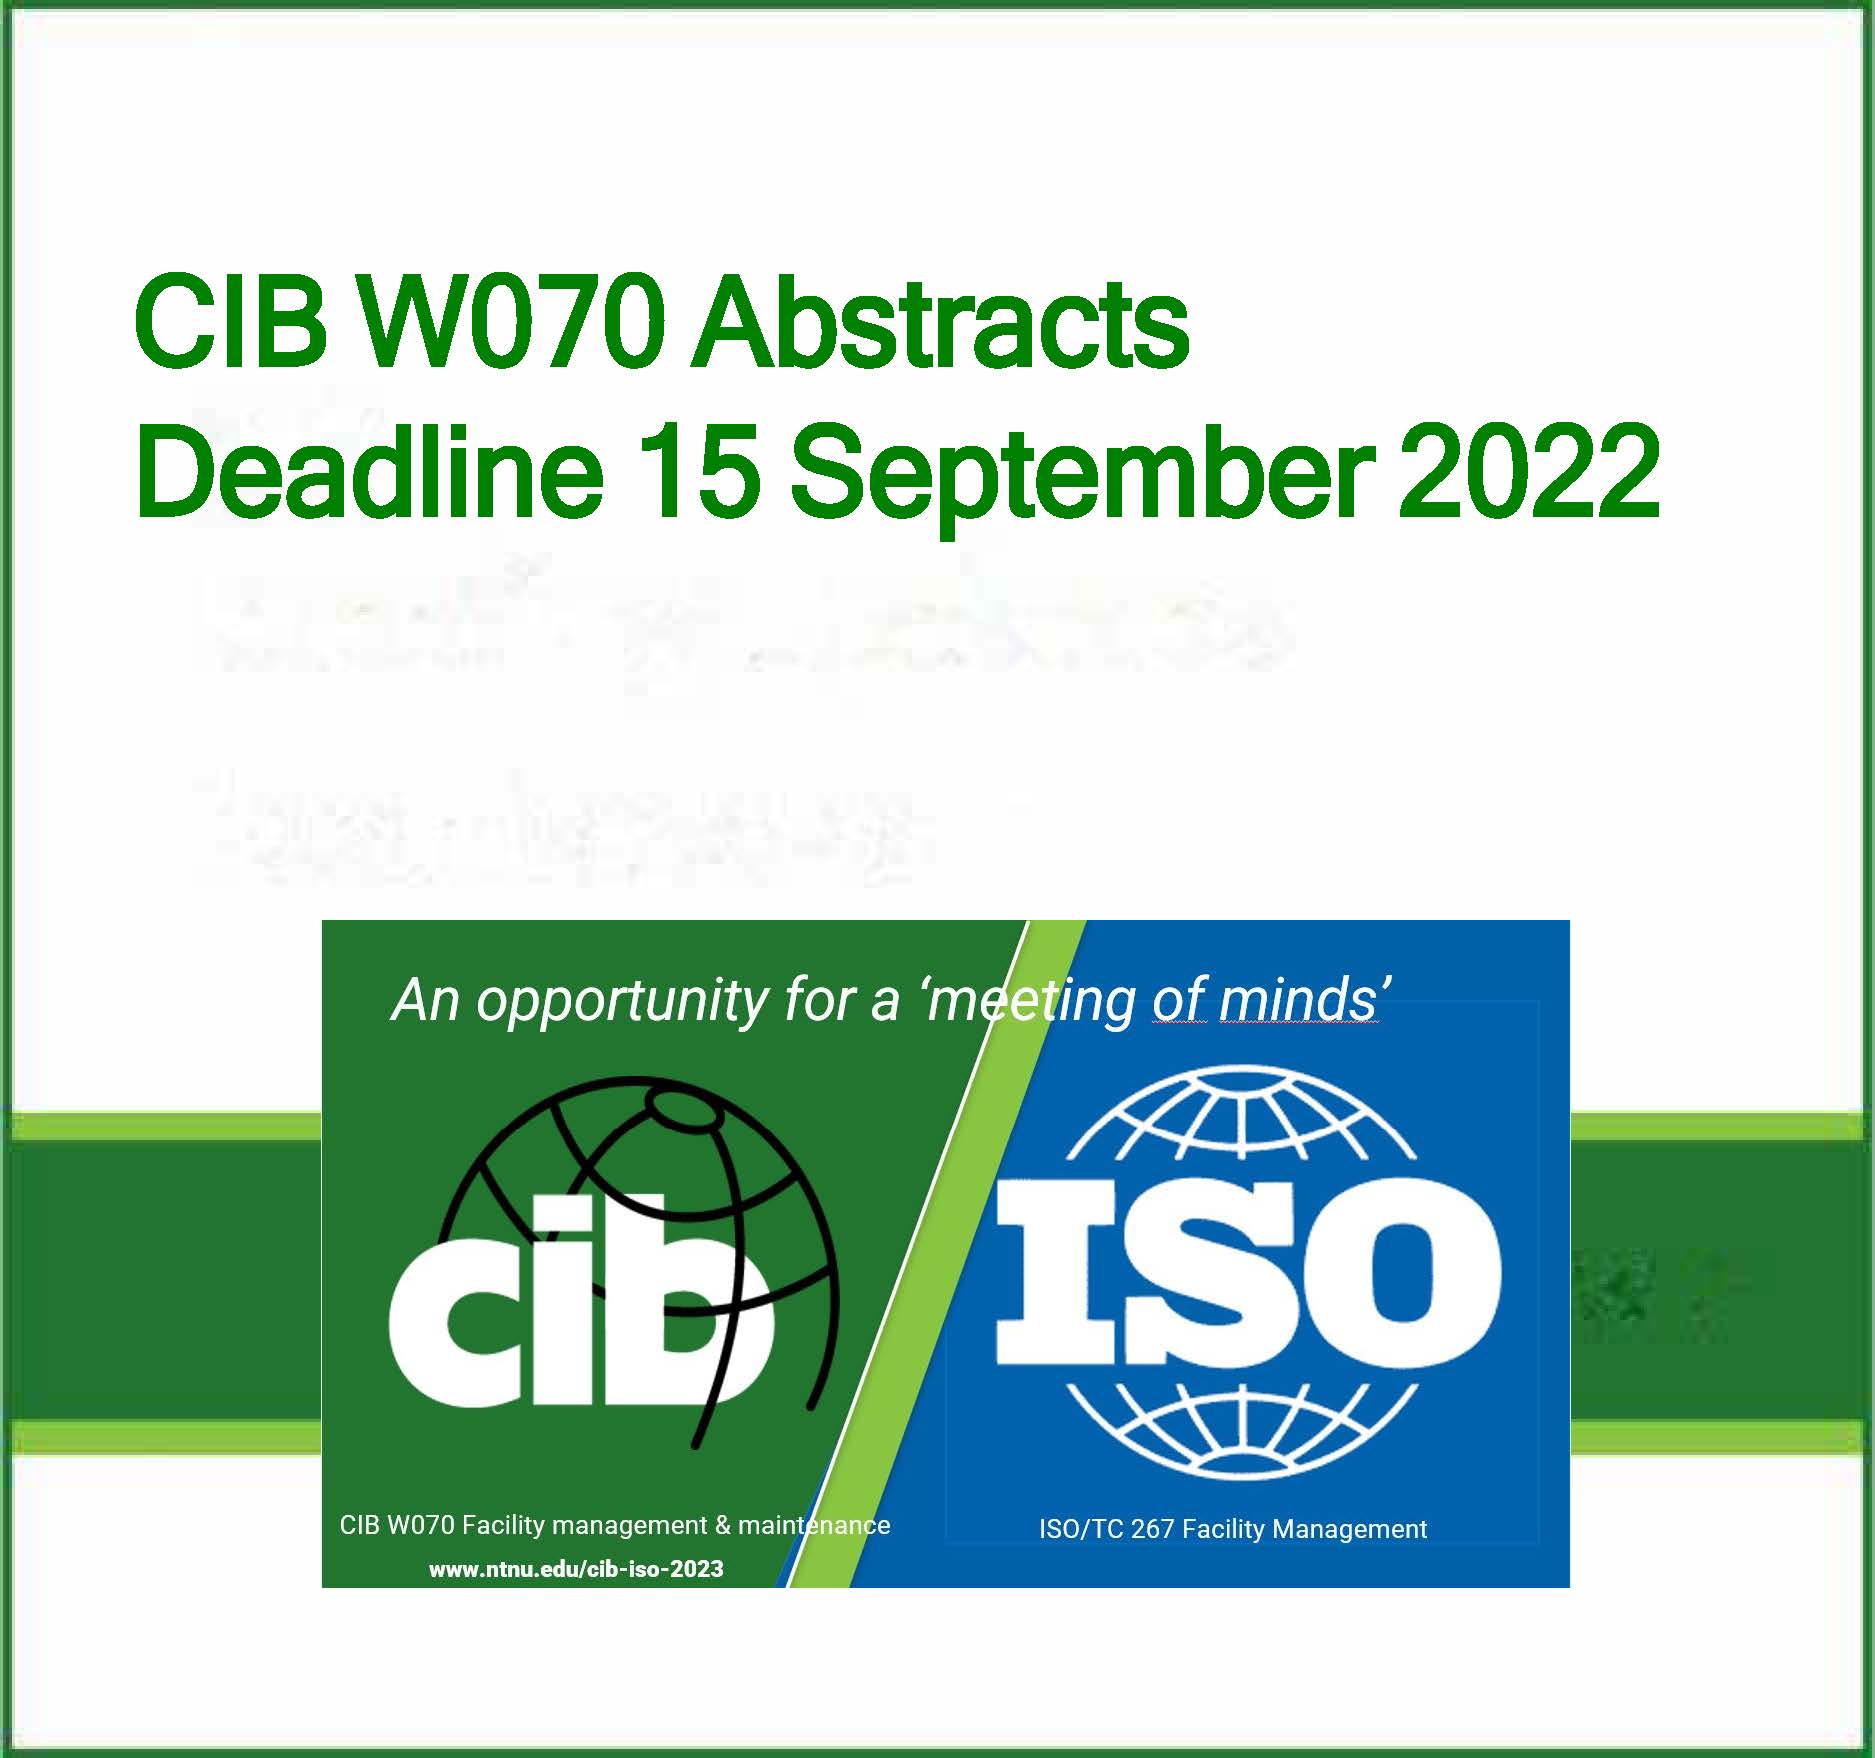 CIB W070 Conference on Facility Management and Maintenance 2023: Abstracts Due 15 September 2022